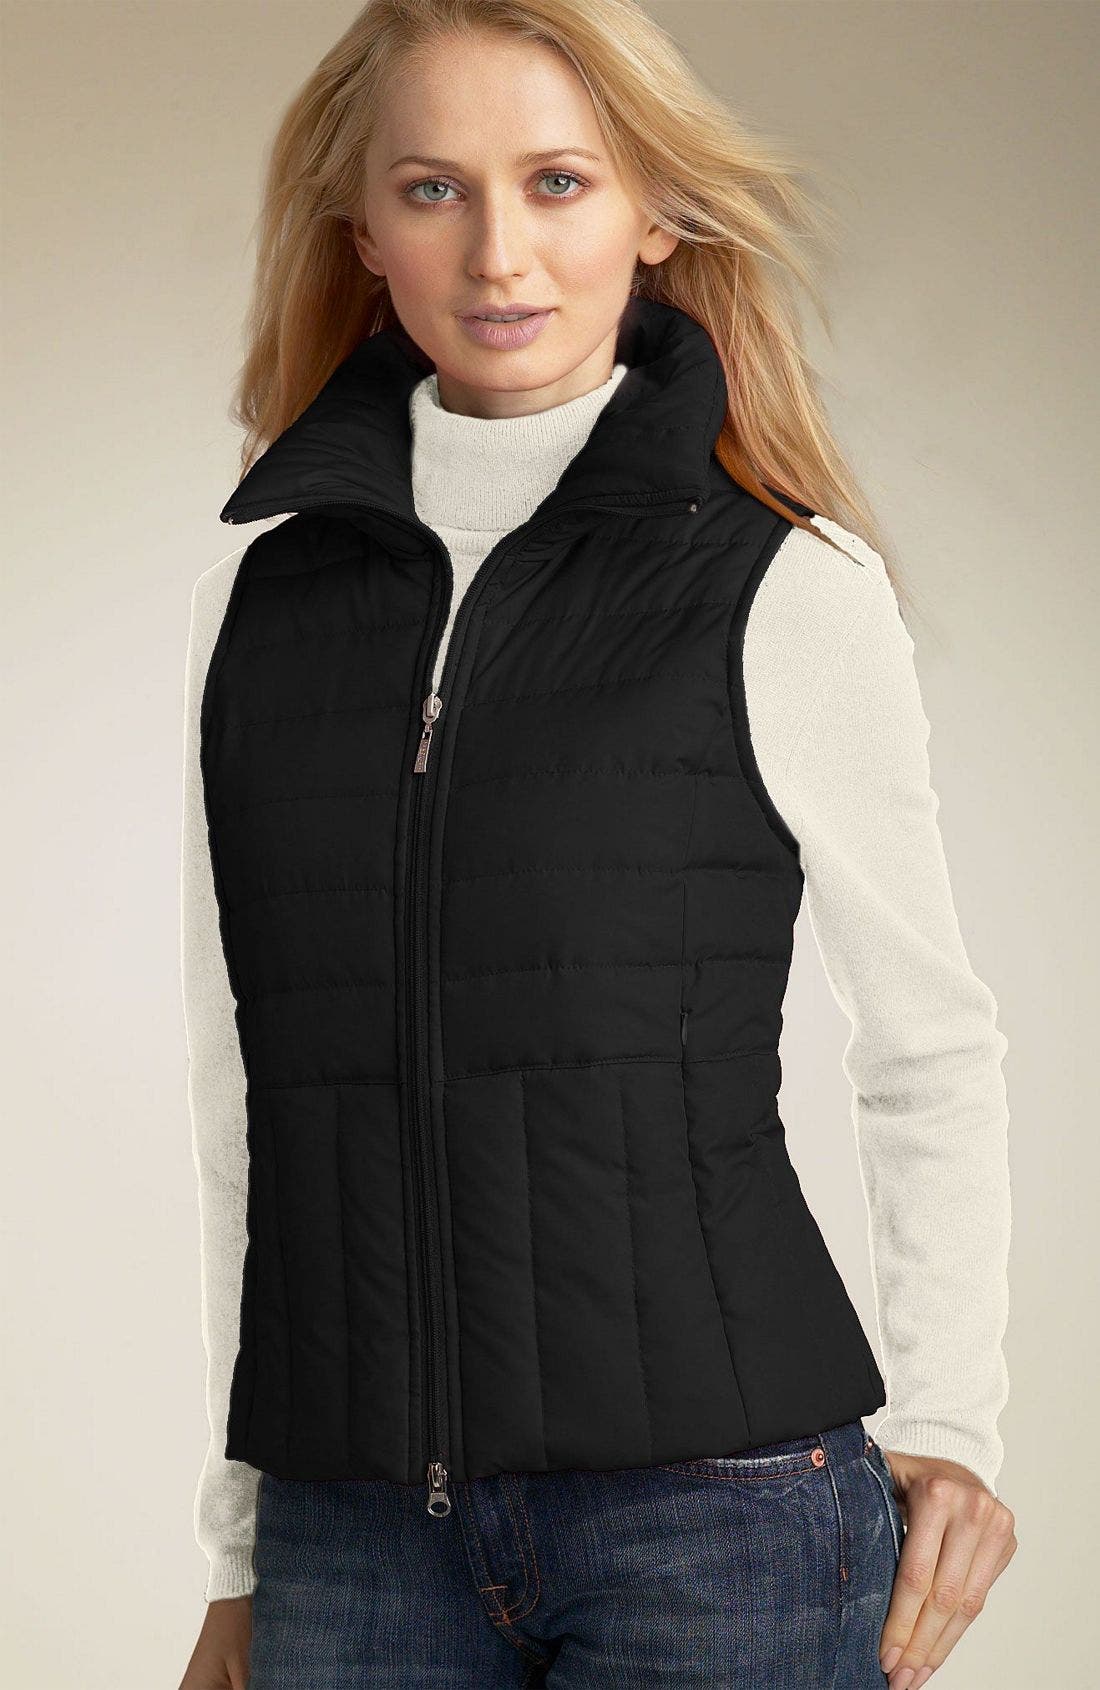 kenneth cole reaction jacket